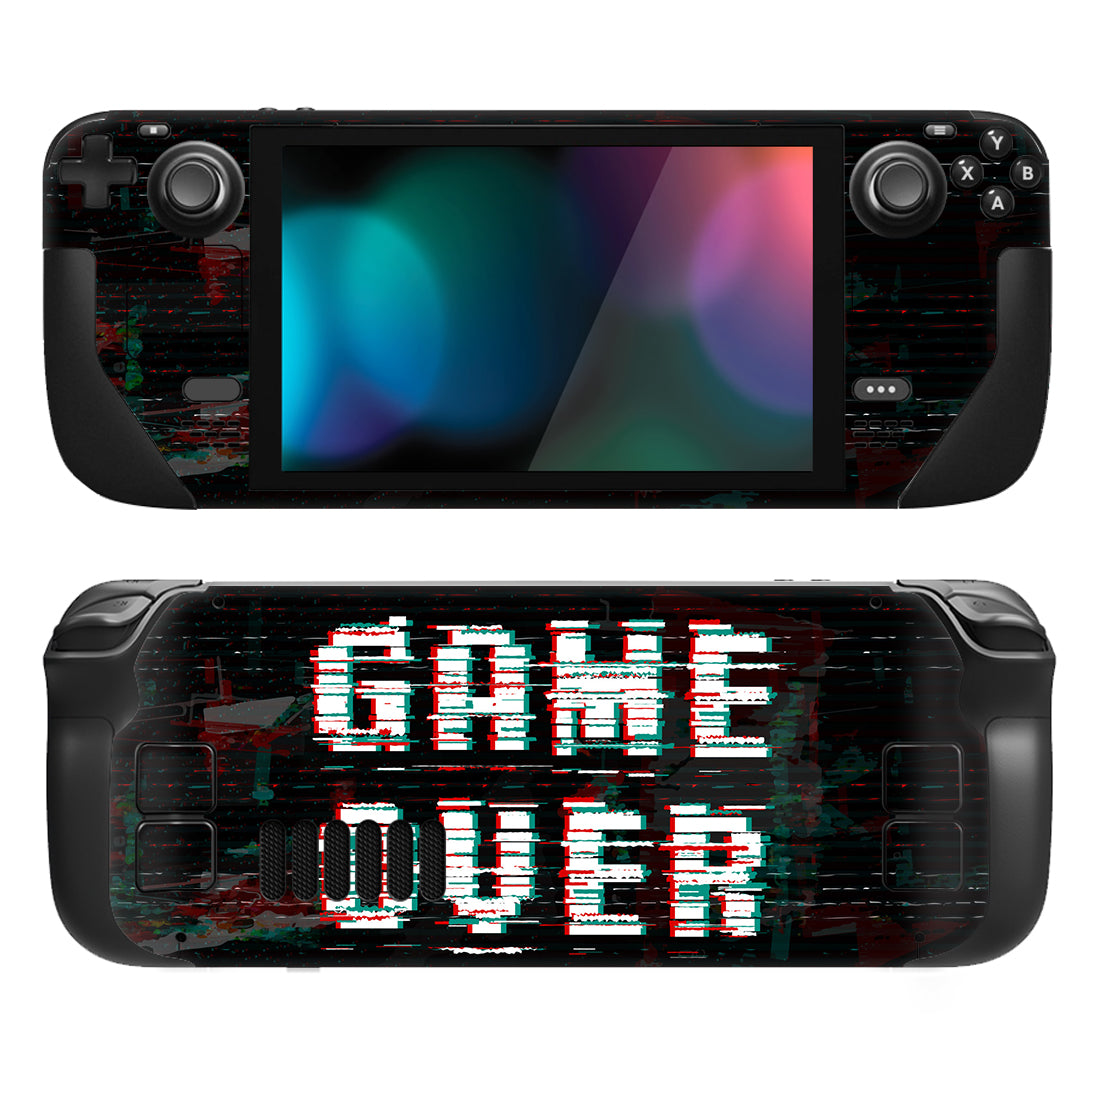 PlayVital Full Set Protective Skin Decal for Steam Deck, Custom Stickers Vinyl Cover for Steam Deck Handheld Gaming PC - Game Over Glitch - SDTM040 playvital